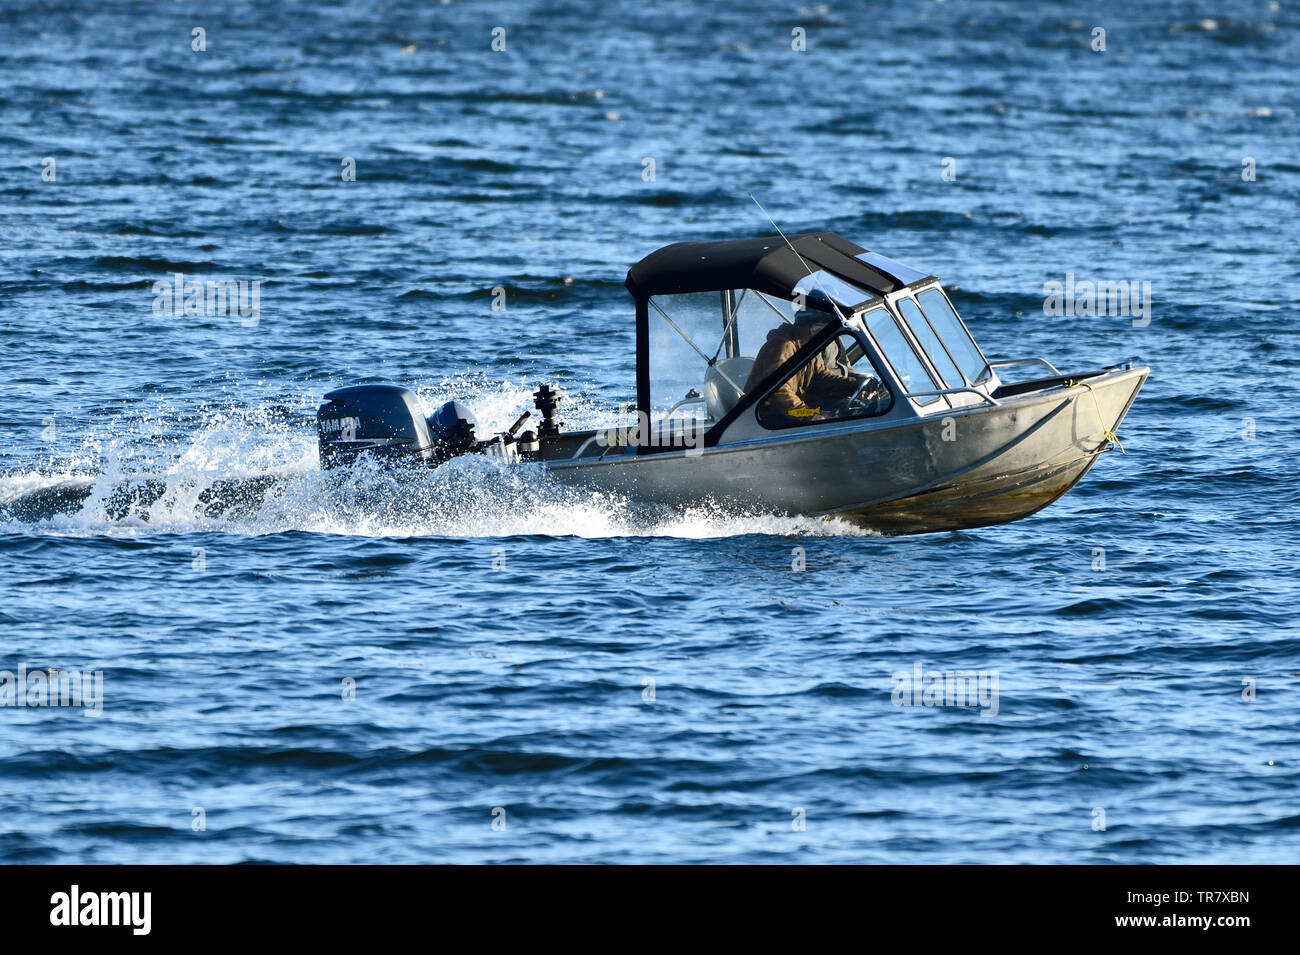 A boat powered by an outboard motor speeding along over the blue water of The Strait of Georgia near Vancouver Island British Columbia. Stock Photo